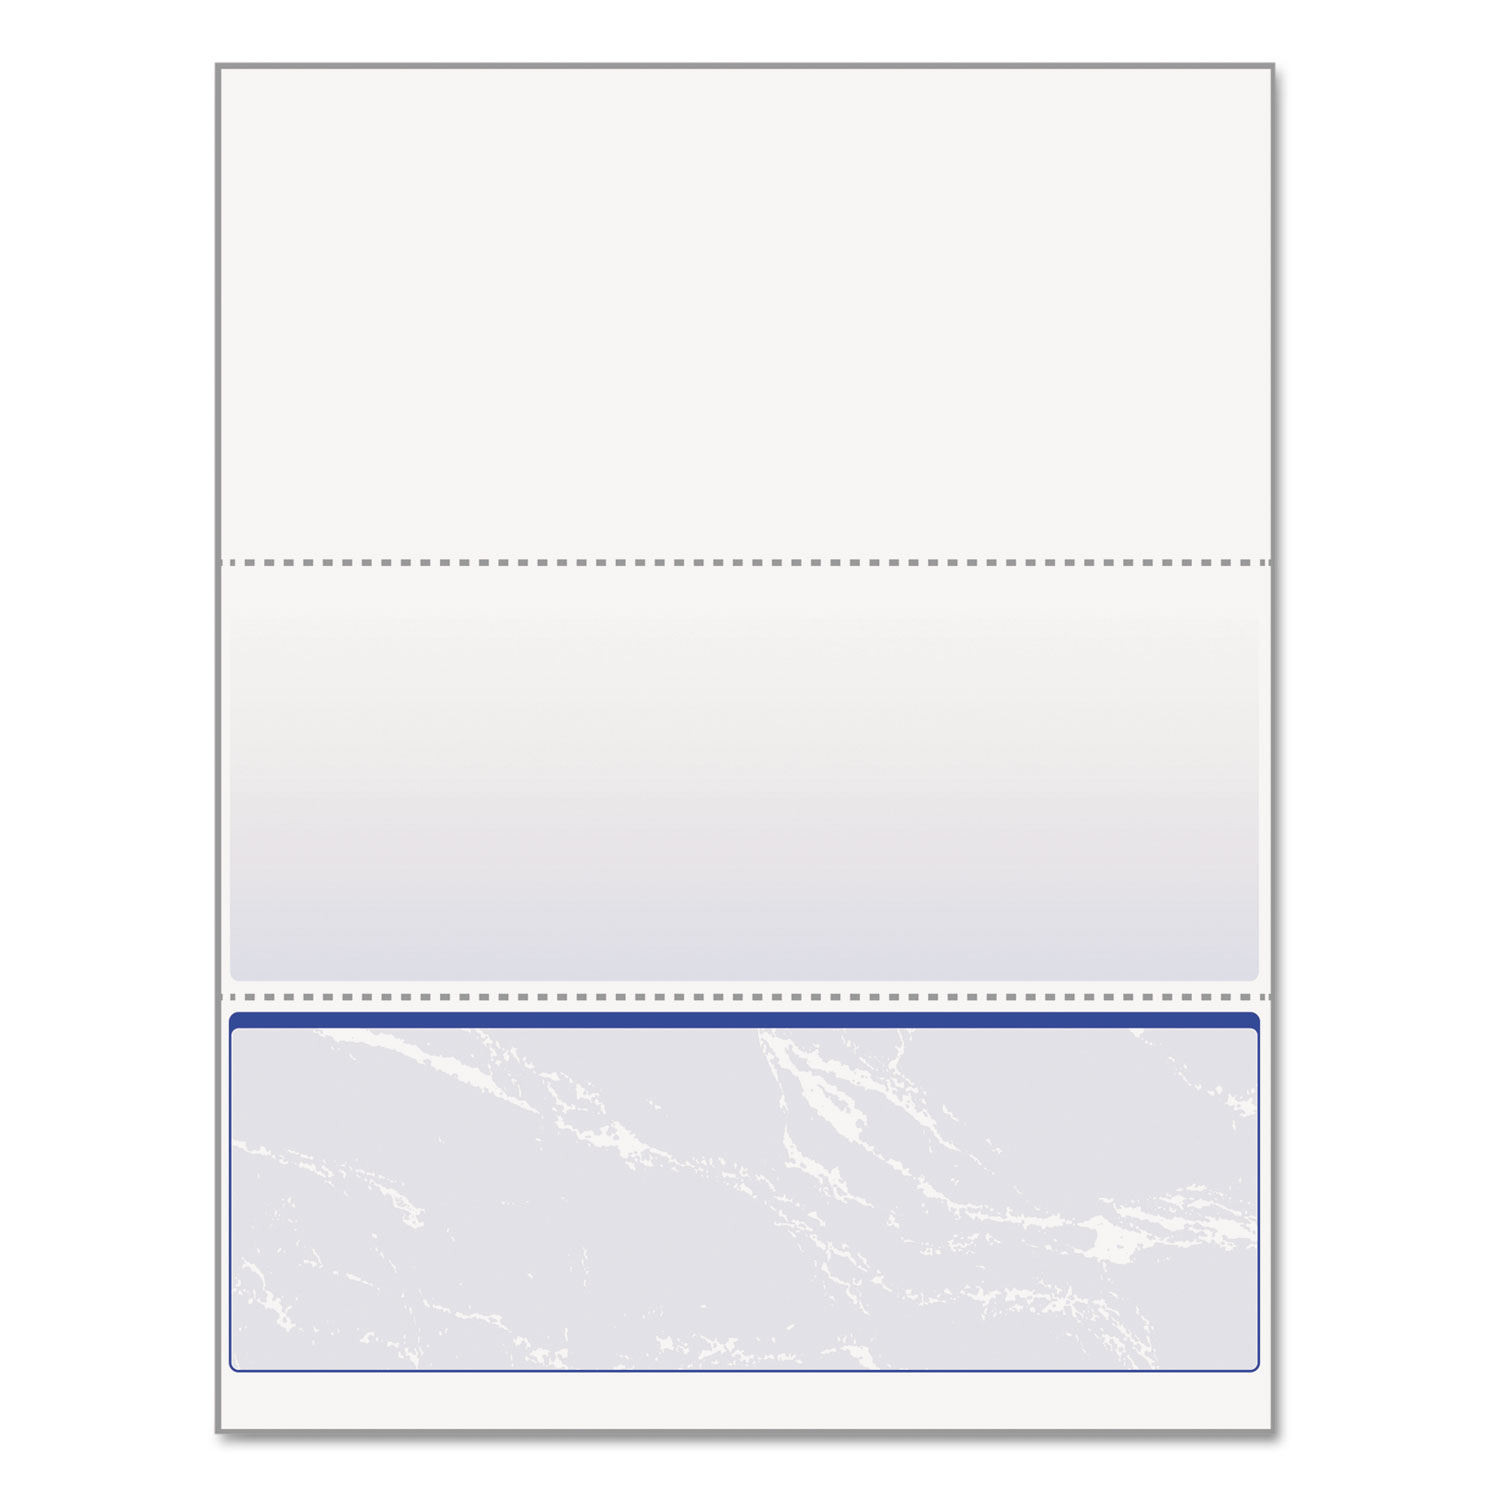 DocuGard Security Business Checks - Letter - 8 1/2" x 11" - 24 lb Basis Weight - Smooth - 500 / Ream - Erasure Protection, Water